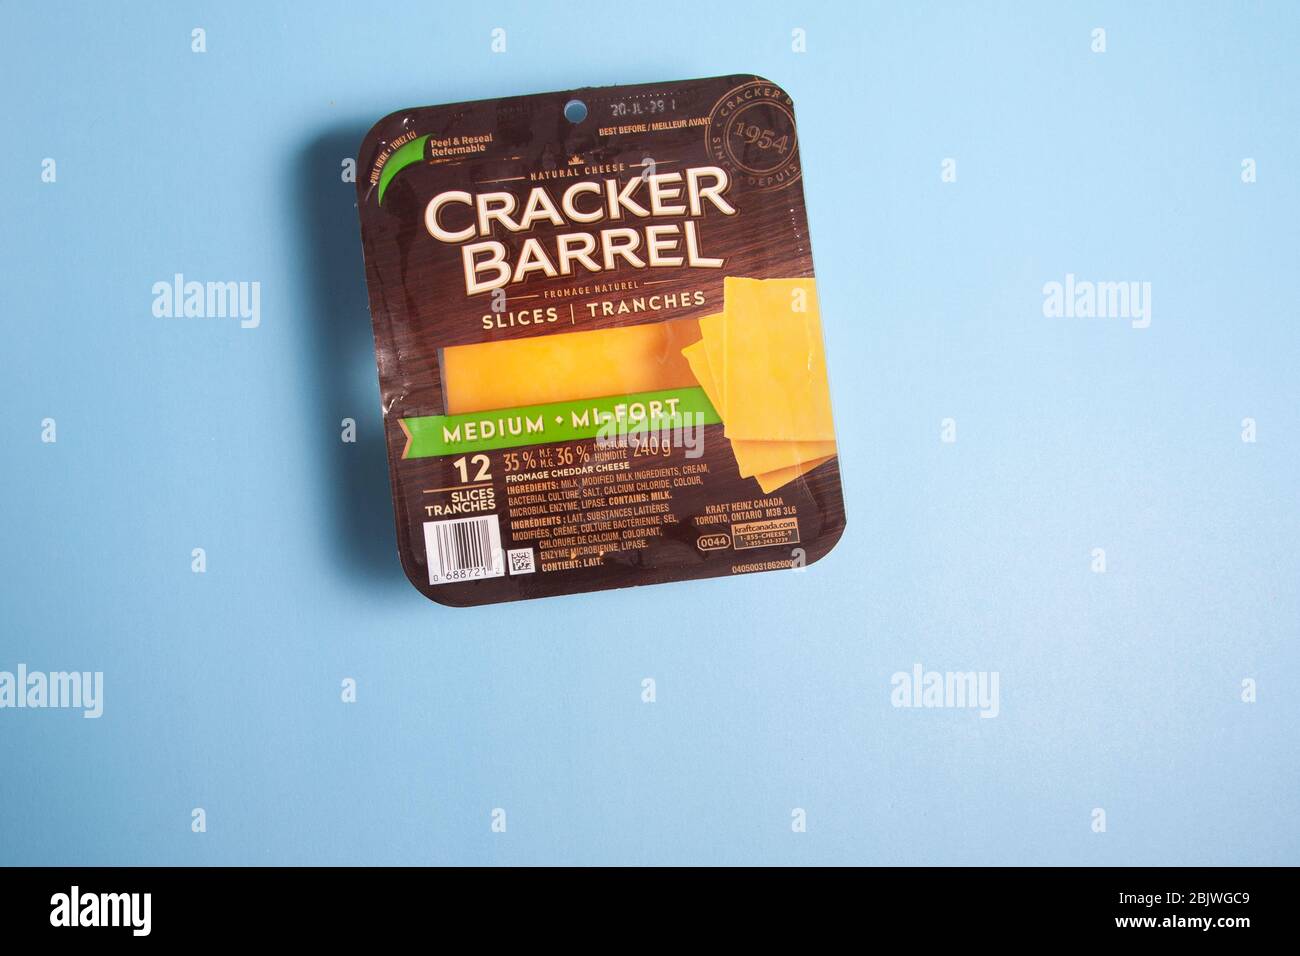 Halifax, Canada - April 11, 2020: A package of re-sealable Cracker Barrel cheese on a blue background Stock Photo